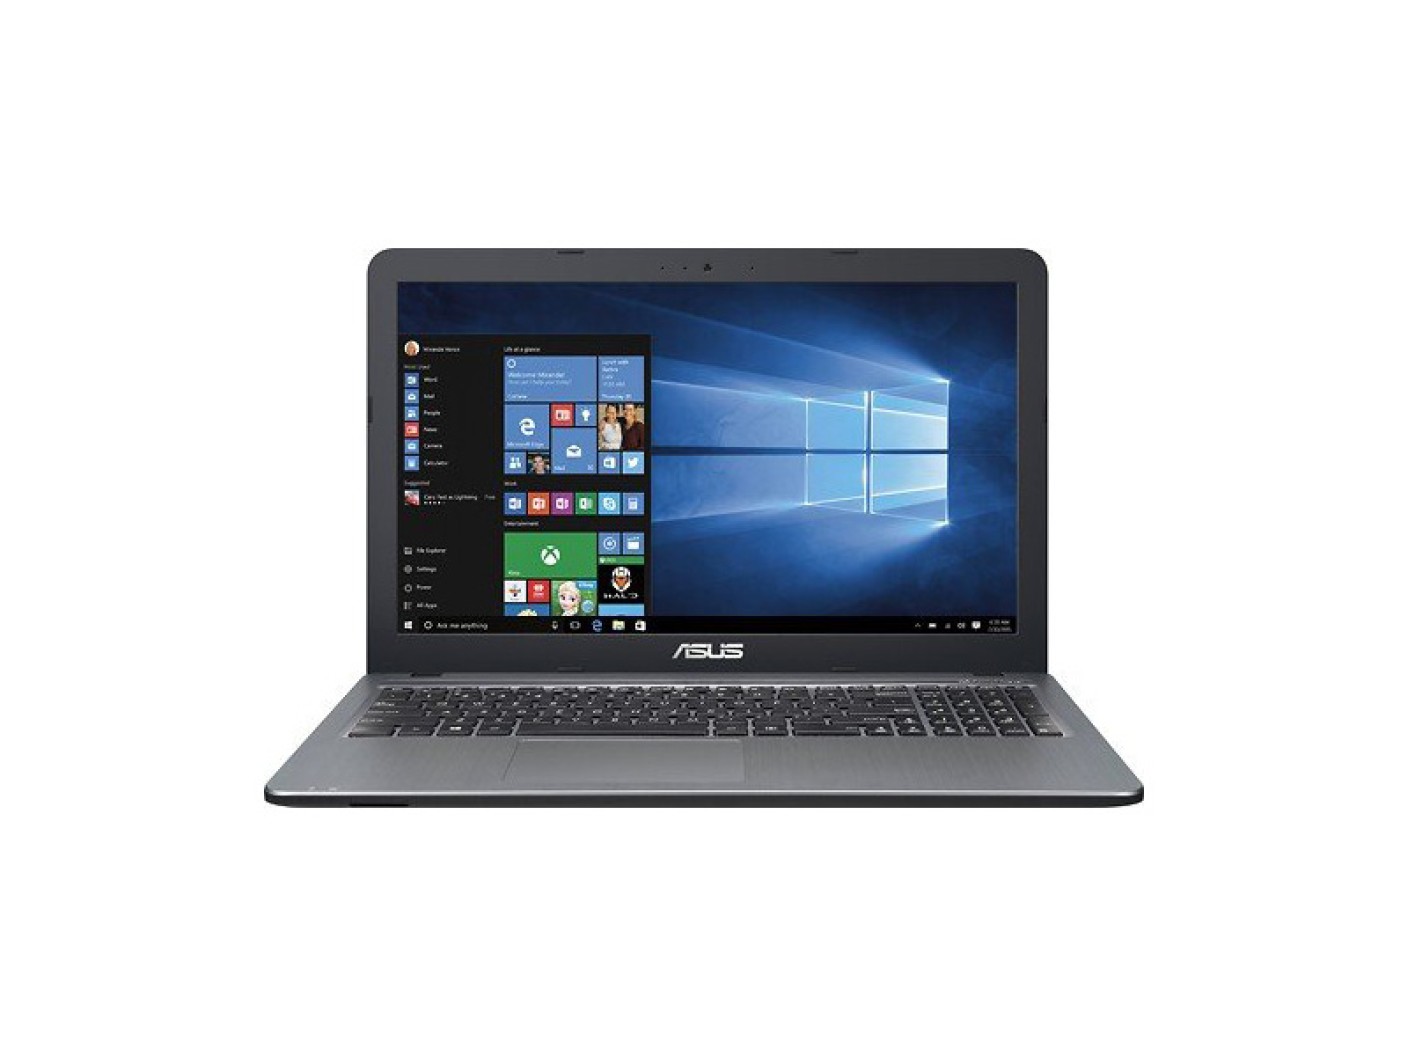 Asus X Core I3 5th Gen 4 Gb1 Tb Hdddos X540la Xx596d Laptop Rs